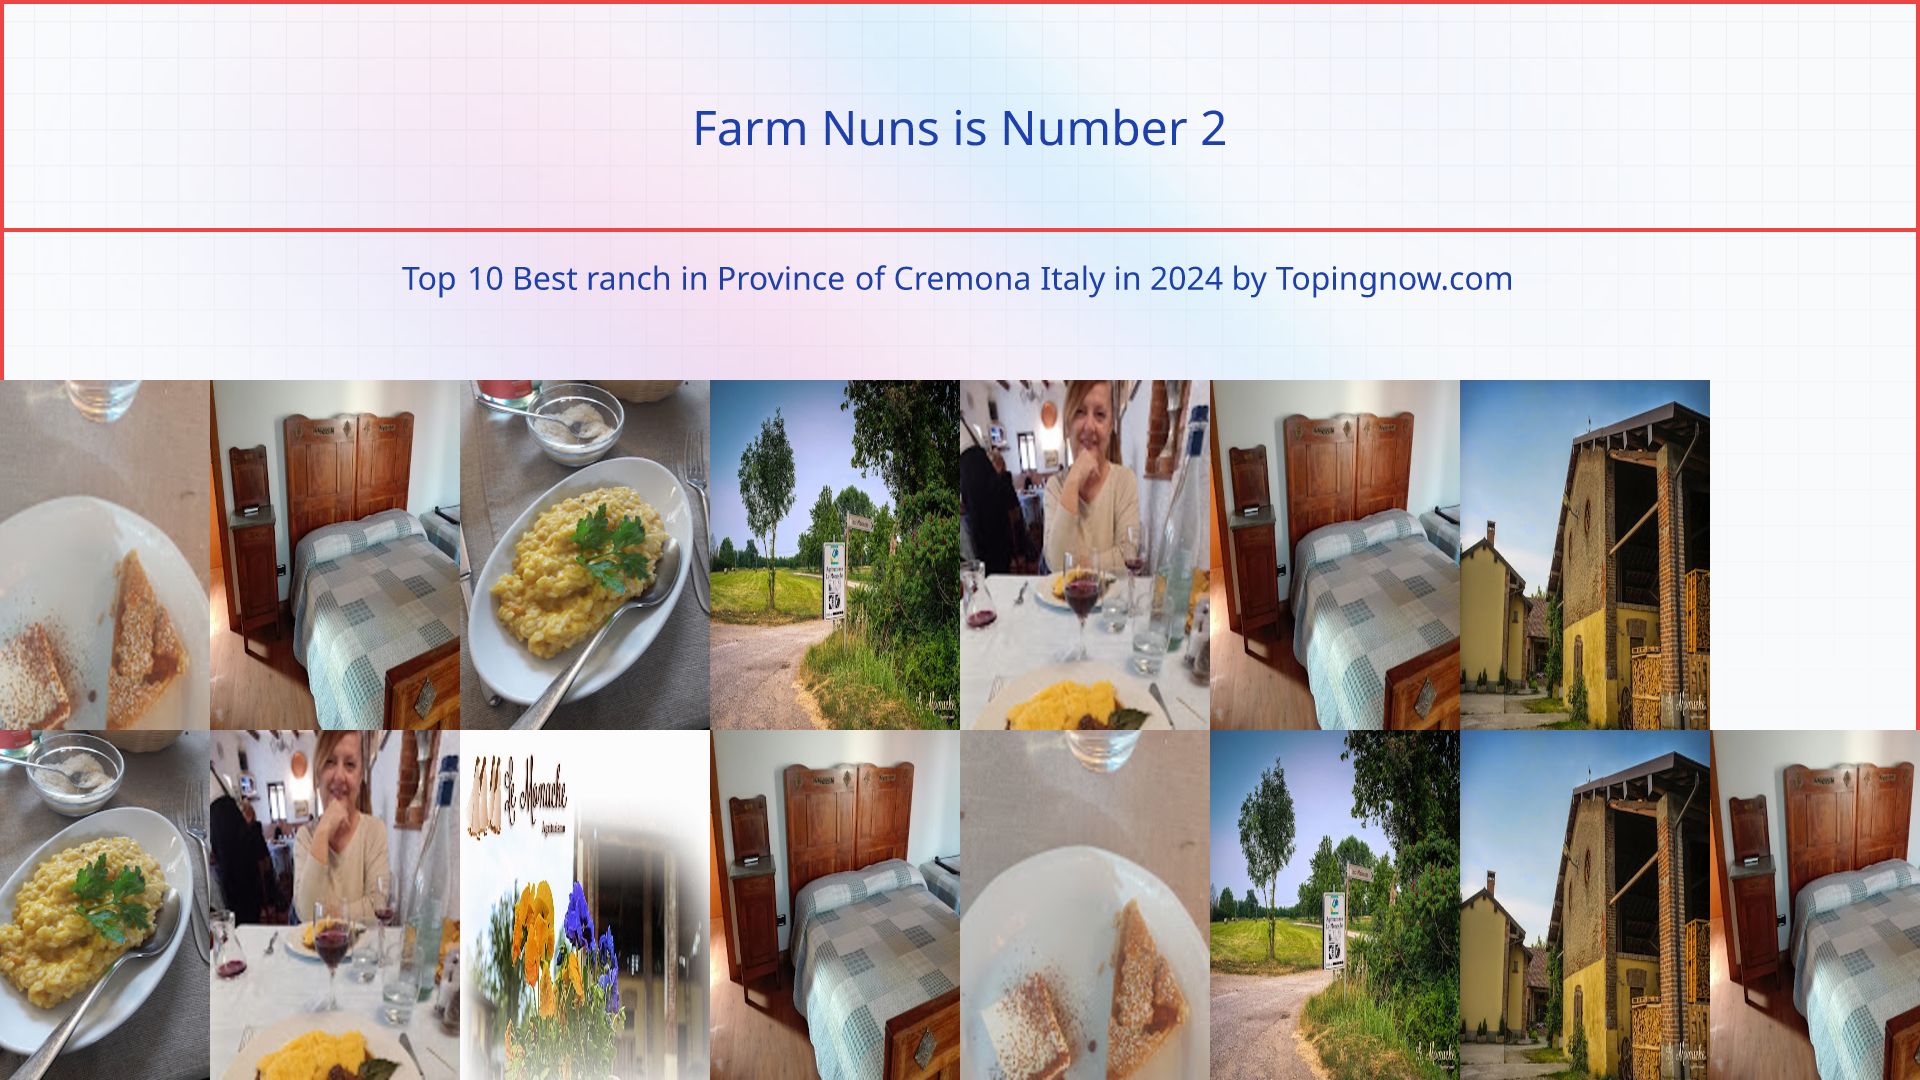 Farm Nuns: Top 10 Best ranch in Province of Cremona Italy in 2024